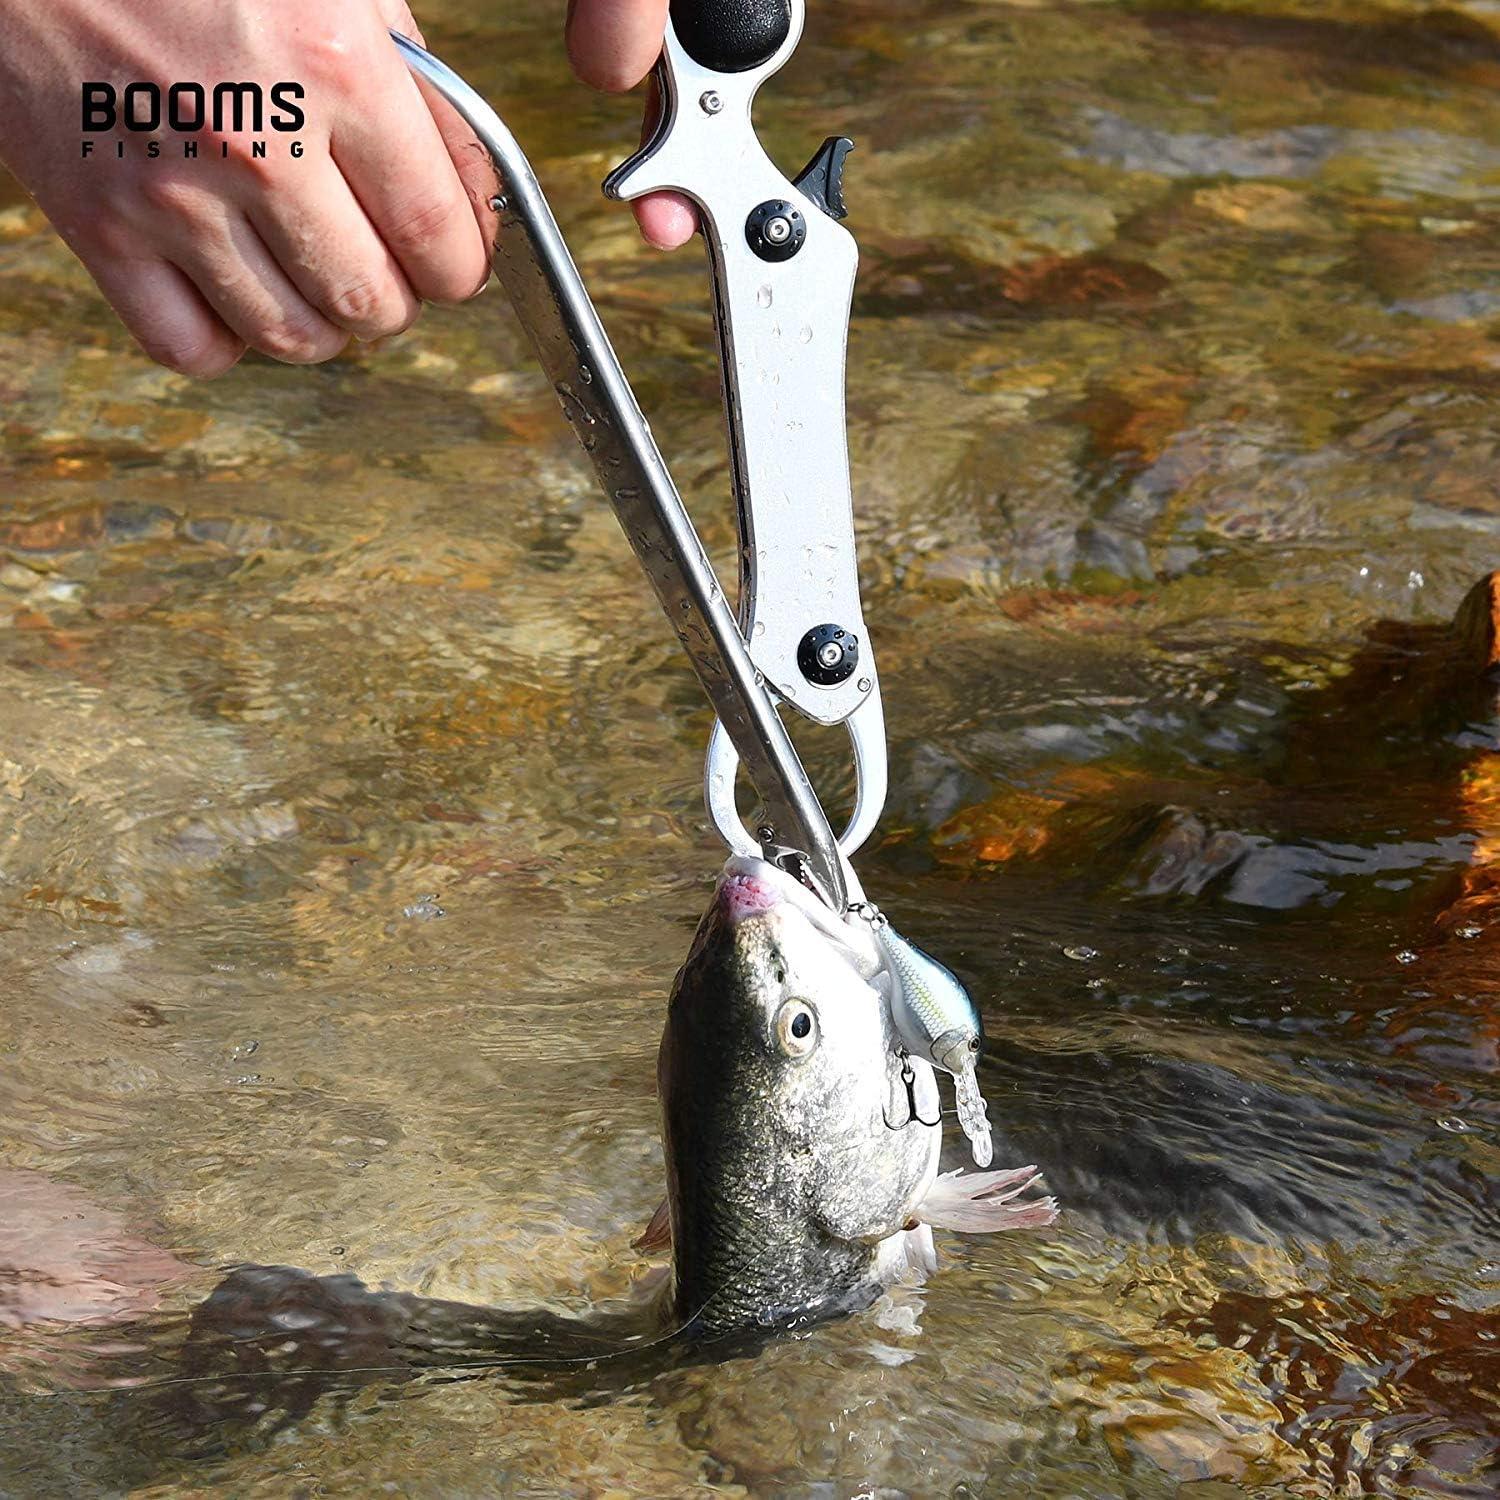 Booms Fishing R1 Stainless Steel Fish Hook Remover India